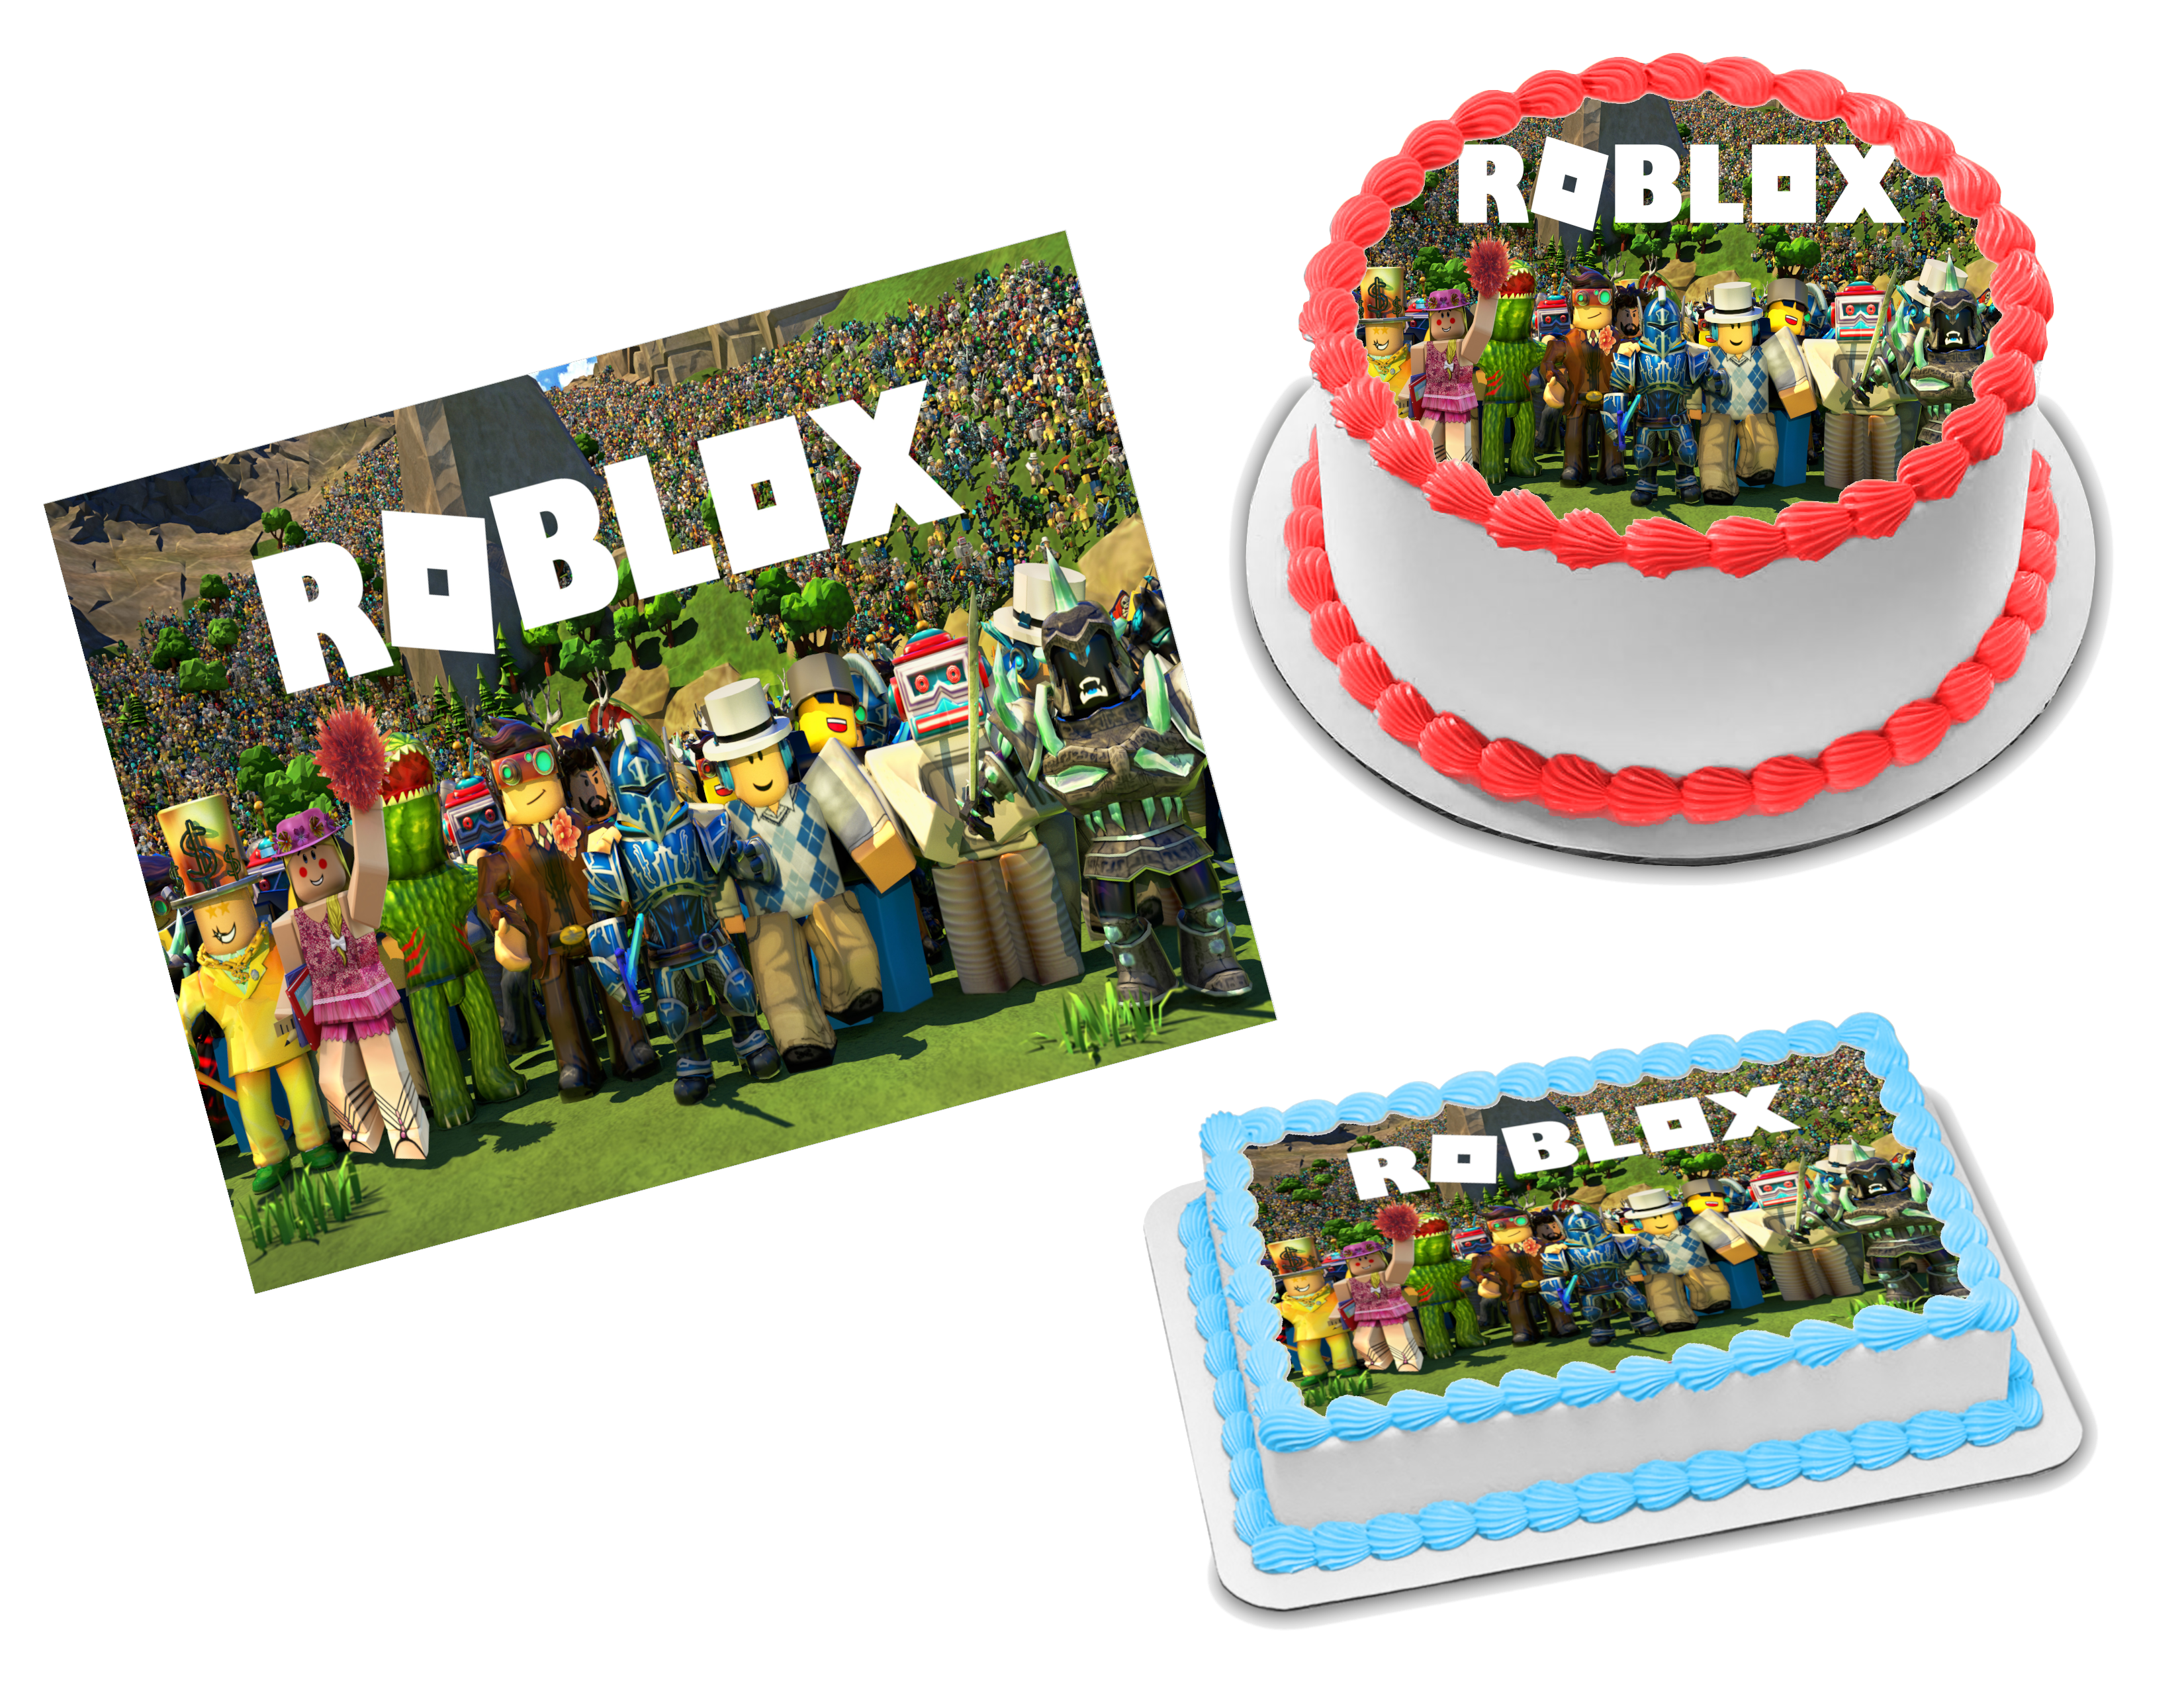 Roblox | Sweet Tops - Personalised, Edible Cake Toppers and Gifts